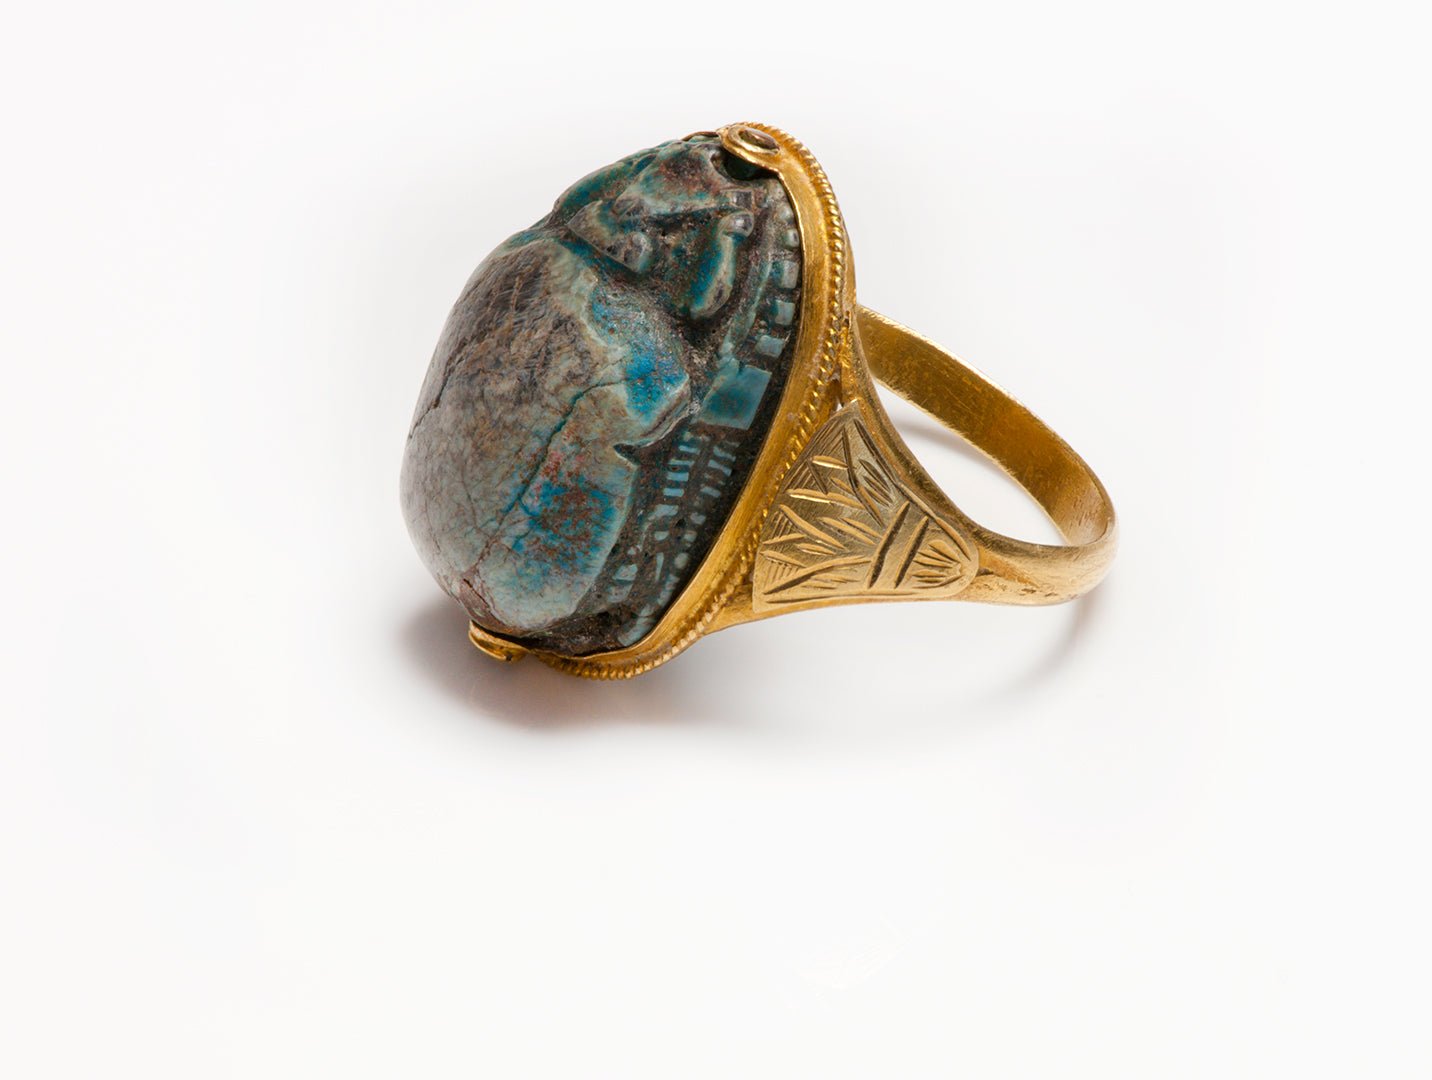 Antique Egyptian Revival Gold Papyrus Scarab Ring - DSF Antique Jewelry